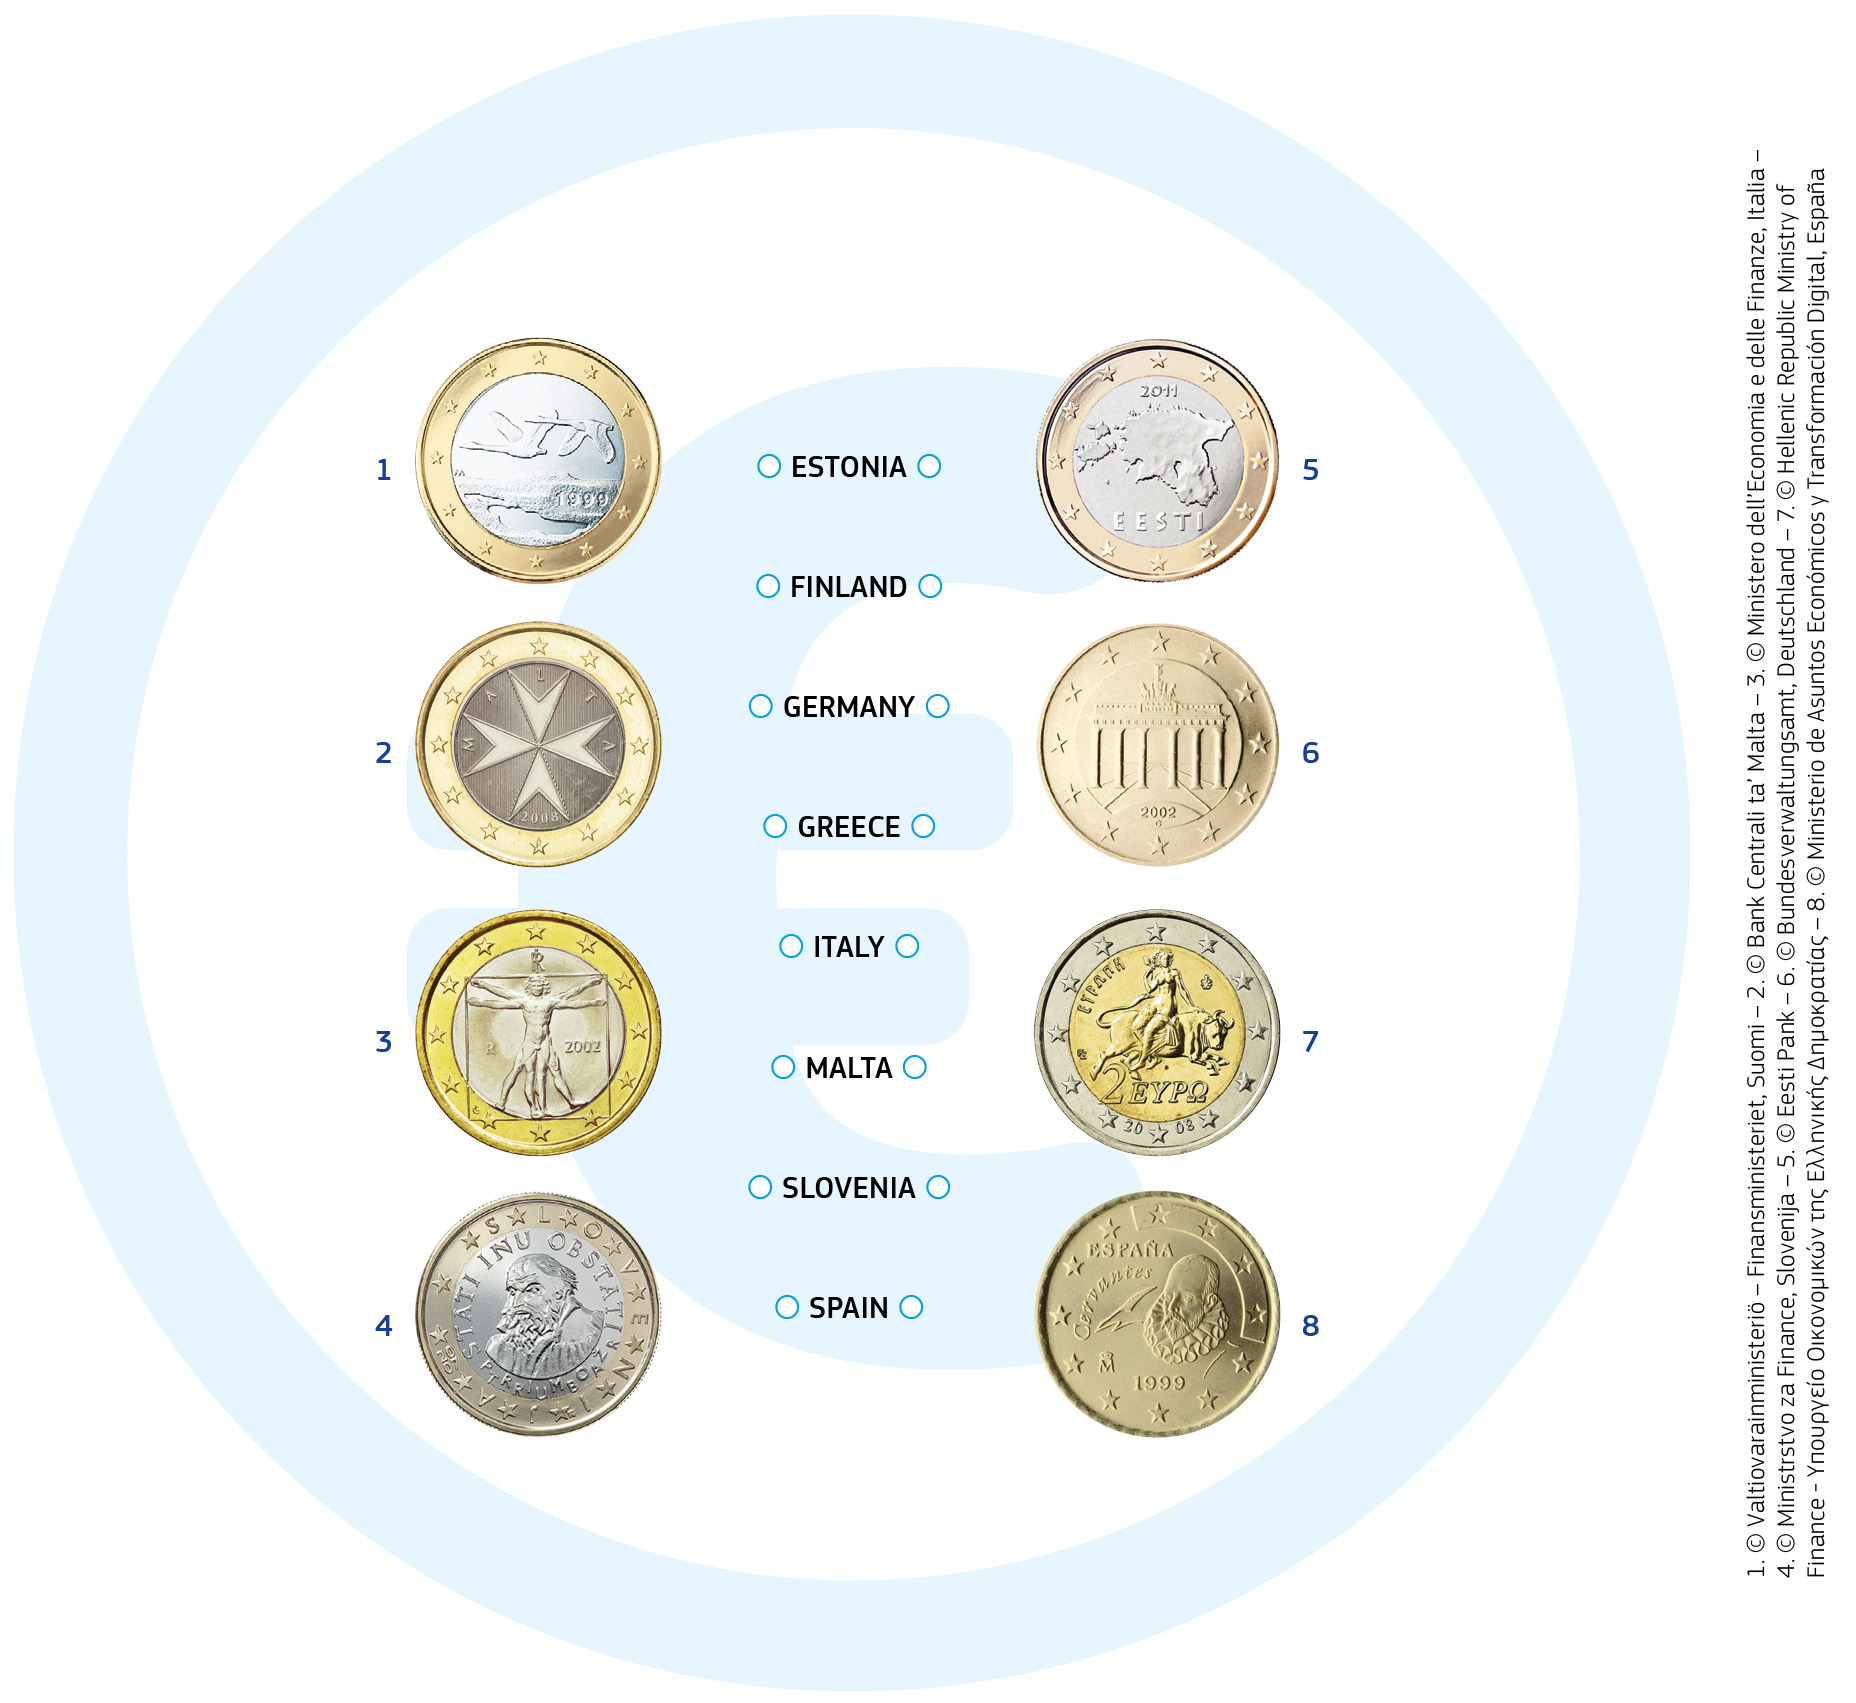 The euro coins all have one side which shows a map of Europe and is the same for every country. On the other side, each country has its own design. Here are a few examples: The 1 euro coin in Finland shows two flying swans. The 1 euro and 2 euro coins in Malta show an emblem called the Maltese cross. The Italian 1 euro coins shows a famous drawing by Leonardo da Vinci, illustrating the ideal proportions of the human body. The Greek 2 euros coin shows Europa, who has taken the form of a bull, being abducted by Zeus. Europa is a figure from Greek mythology after whom Europe was named.